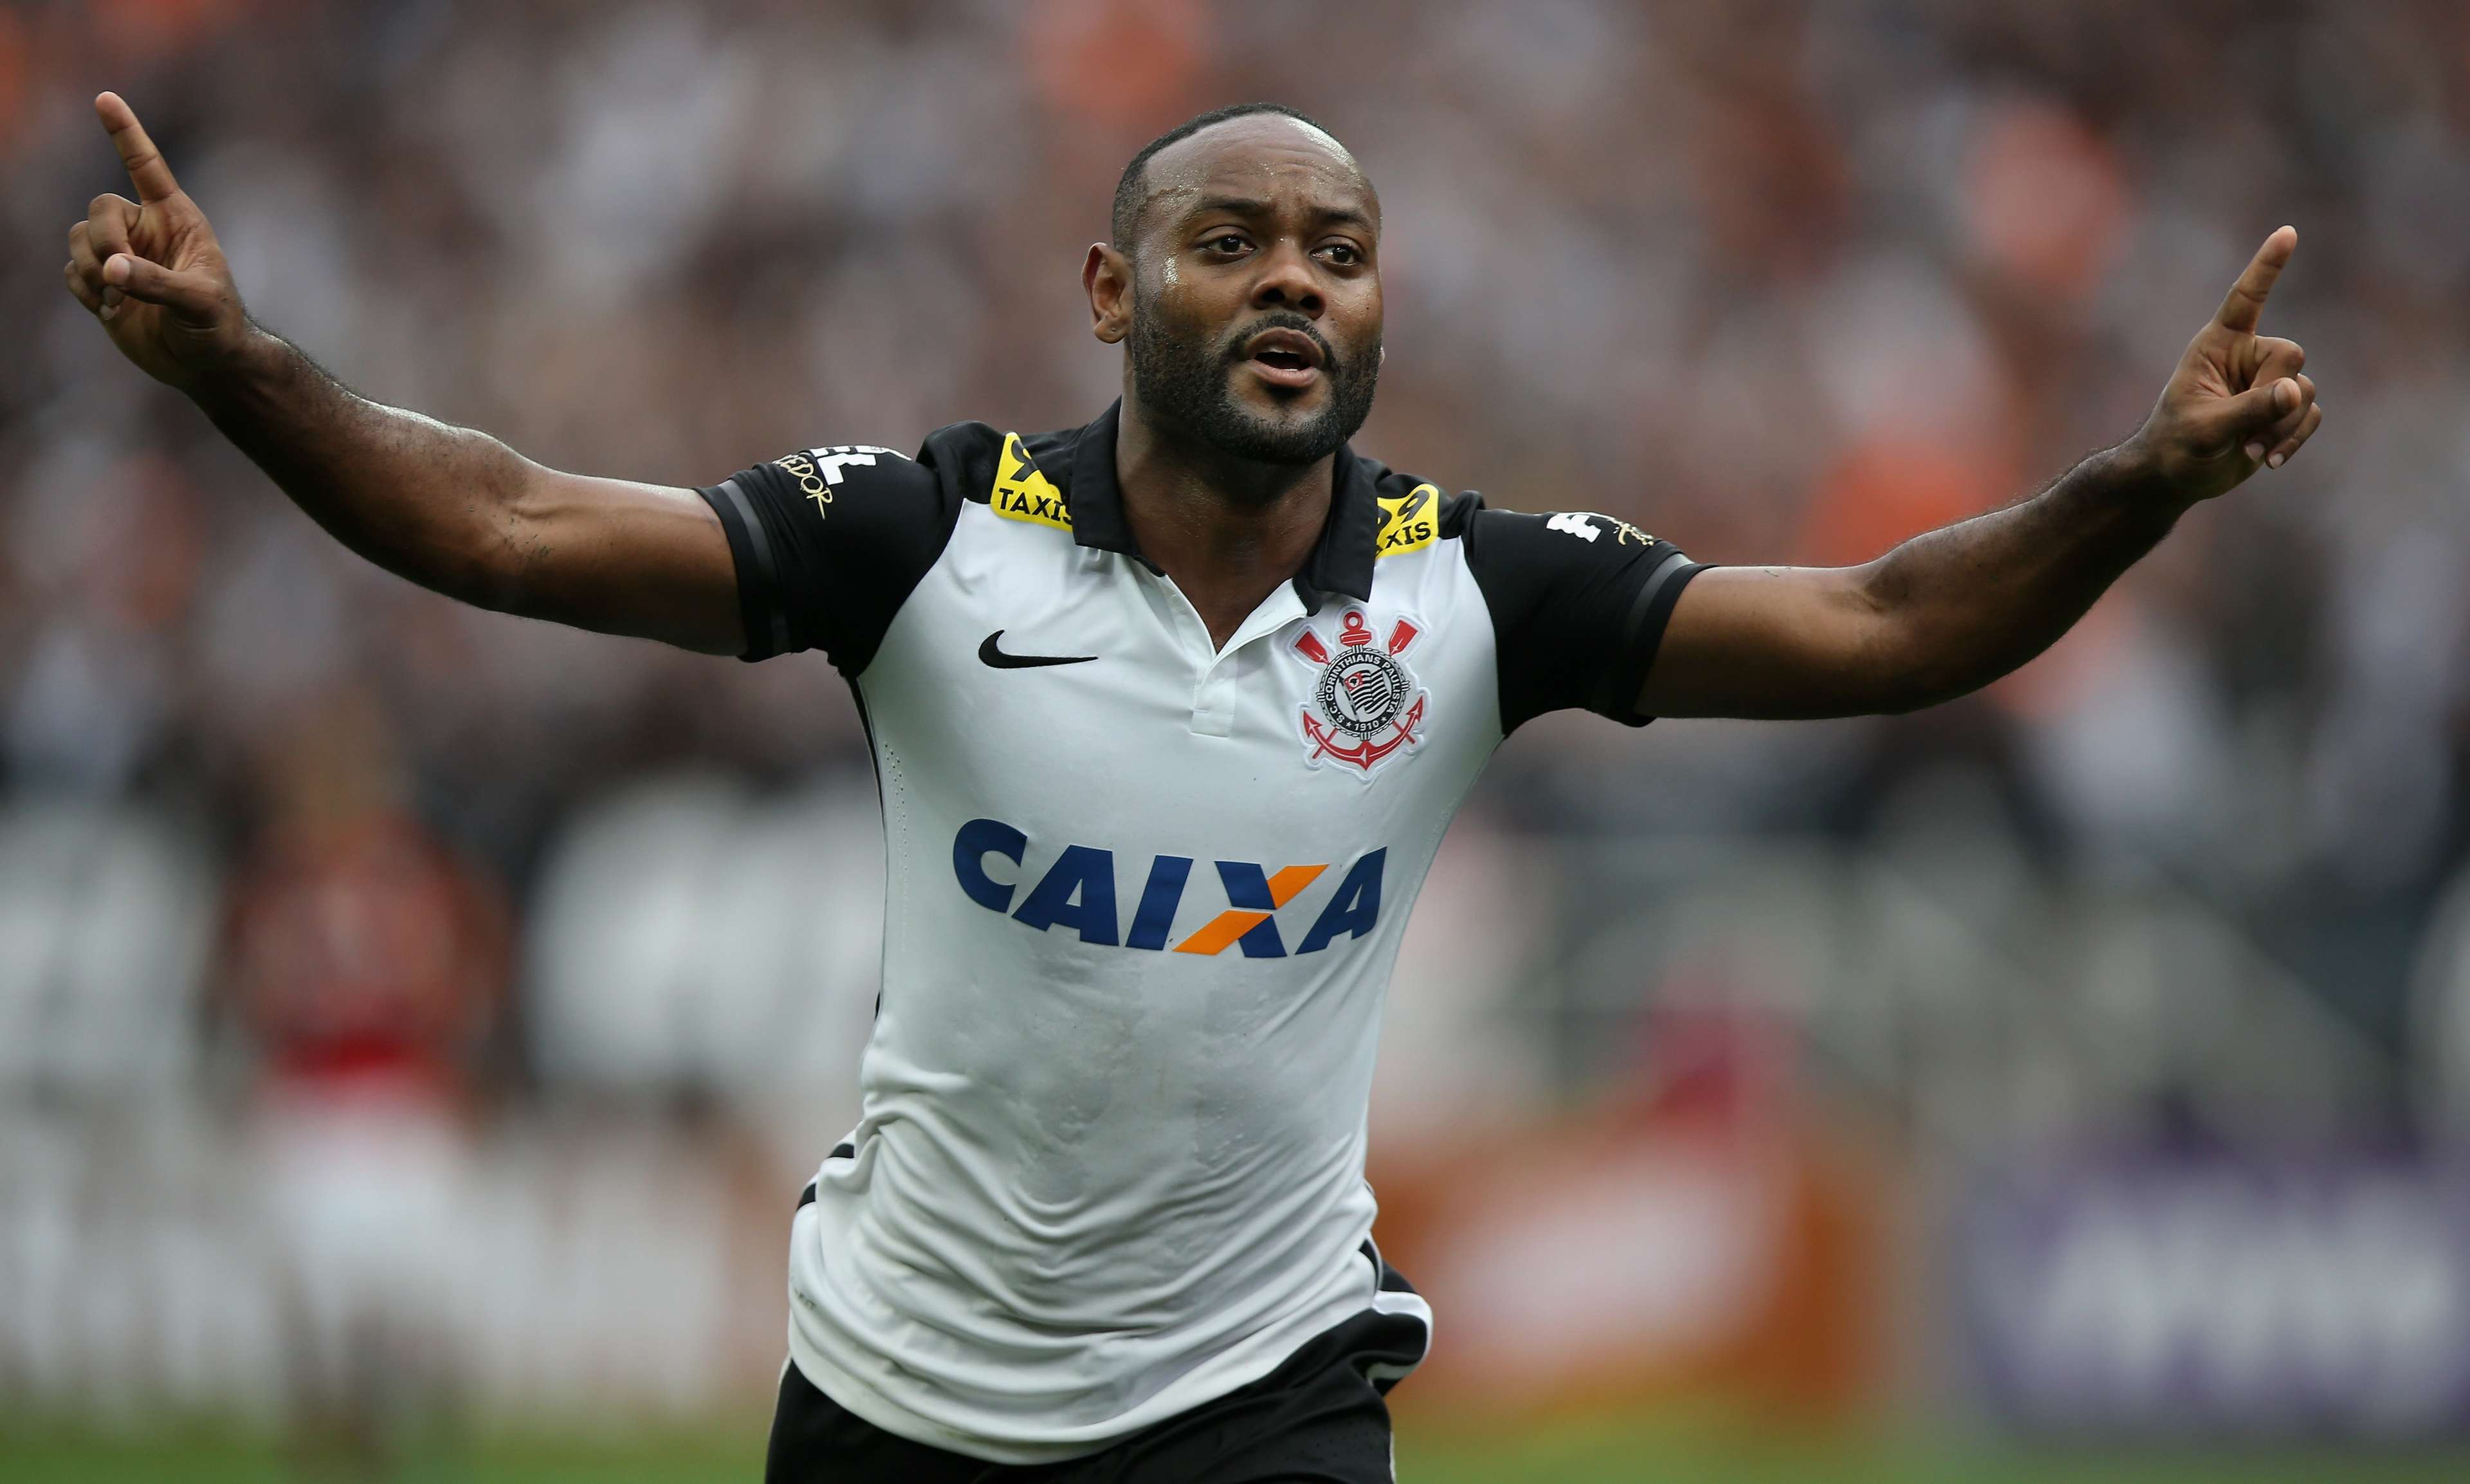 ONLY GALLERY Vagner Love Corinthians